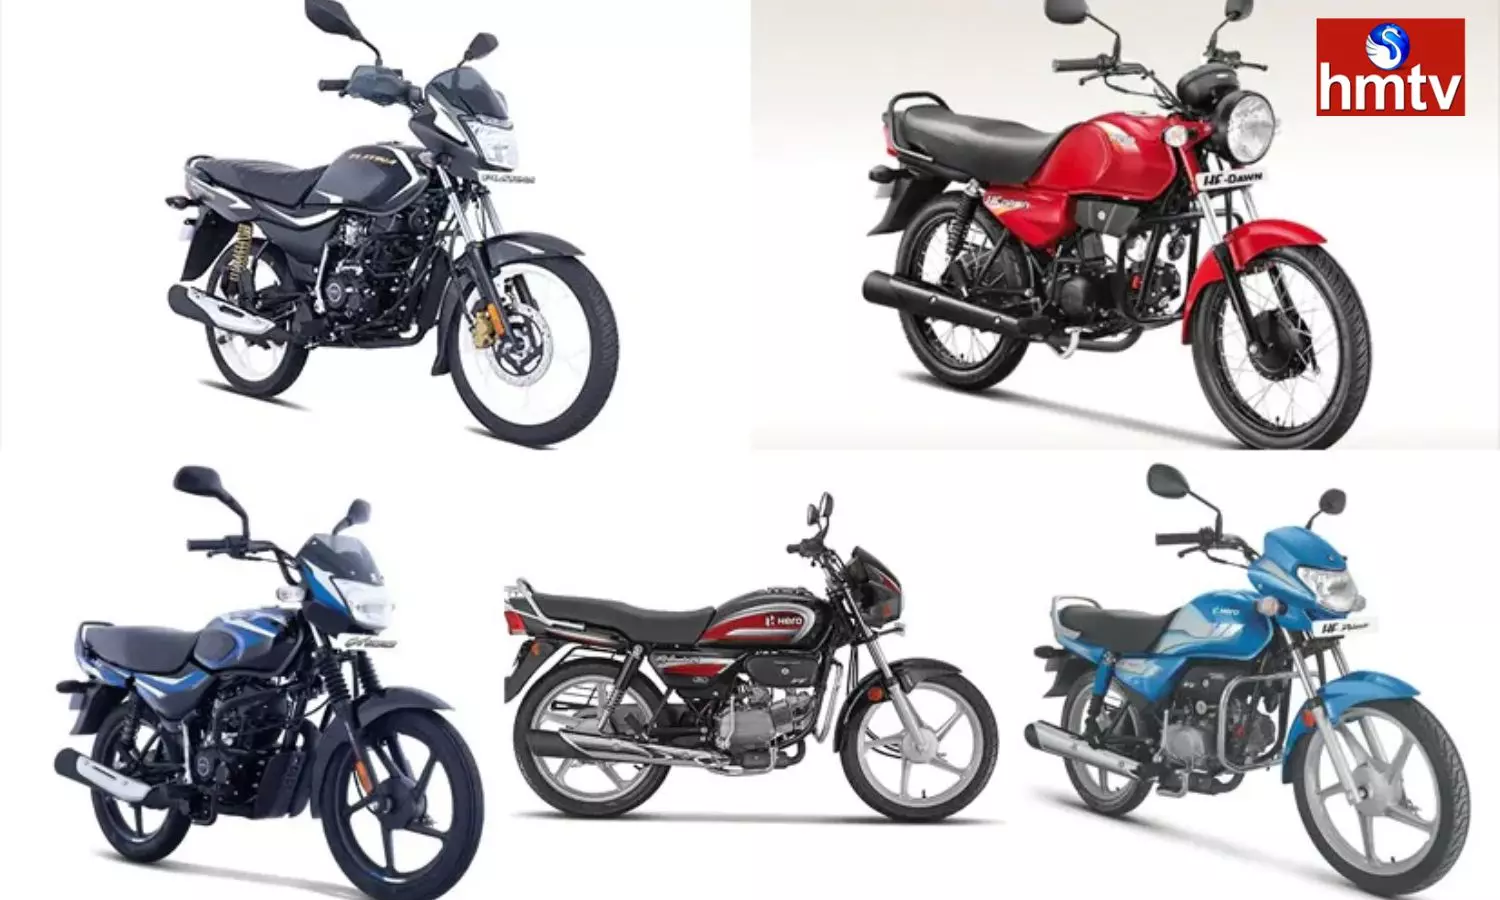 From Honda Shine to Tvs sports these 5 best 100 cc bikes in Indian market